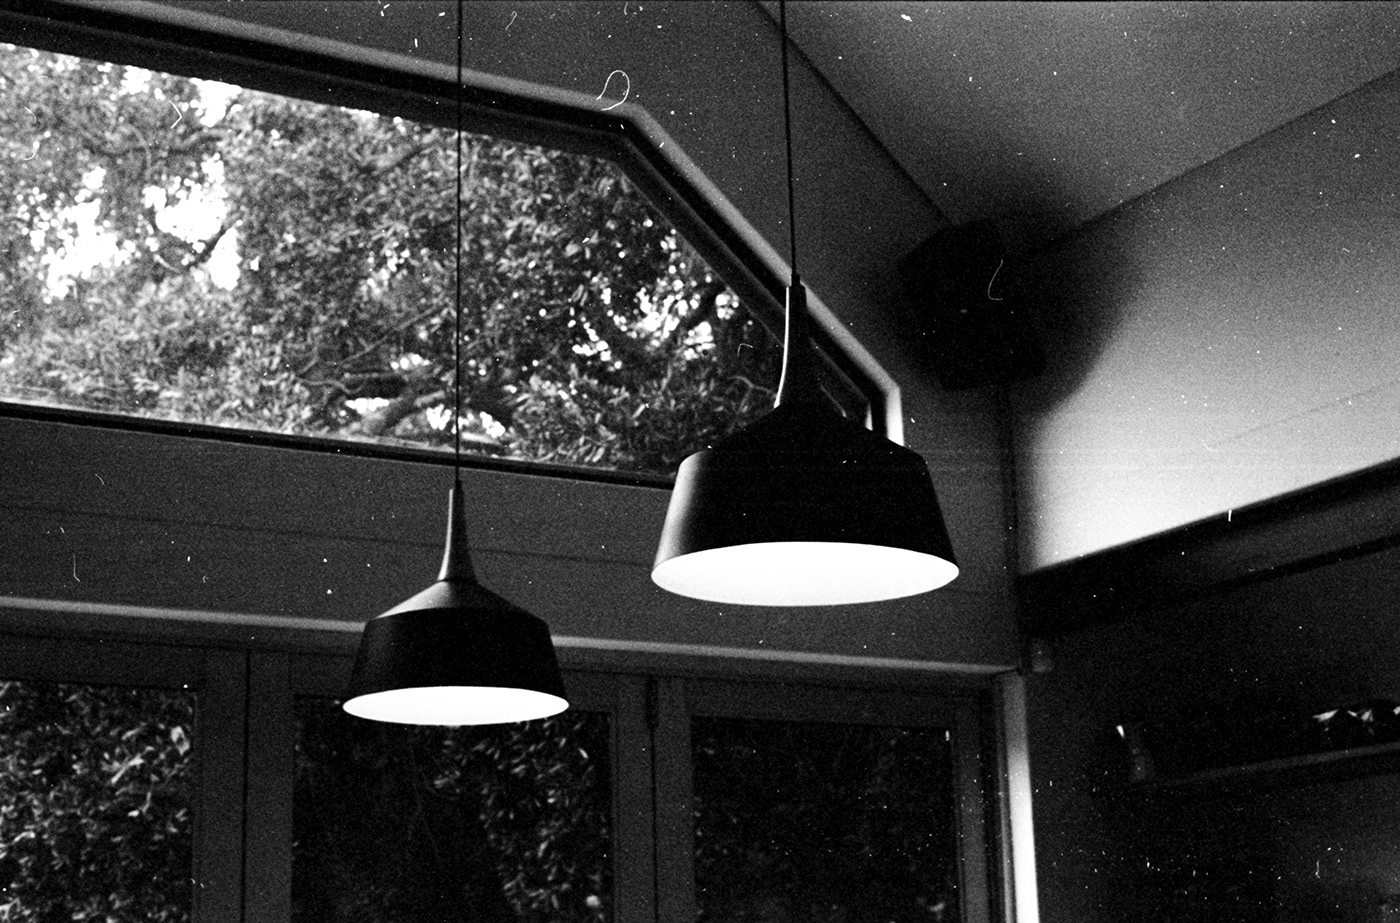 35mm film black and white film photography Pentax k1000